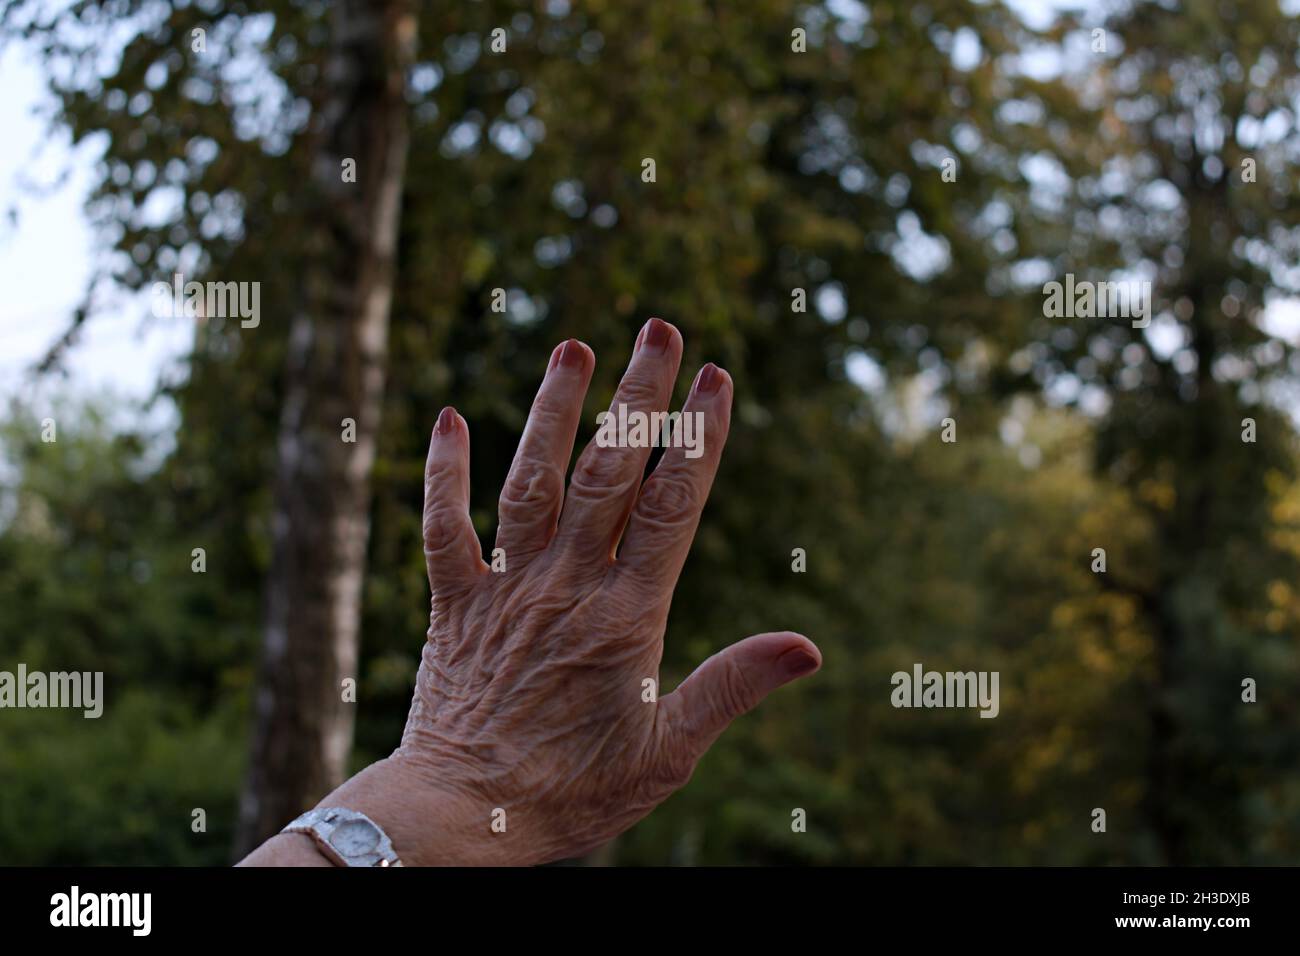 fingers of elderly woman hand with blurred foreground and background Stock Photo